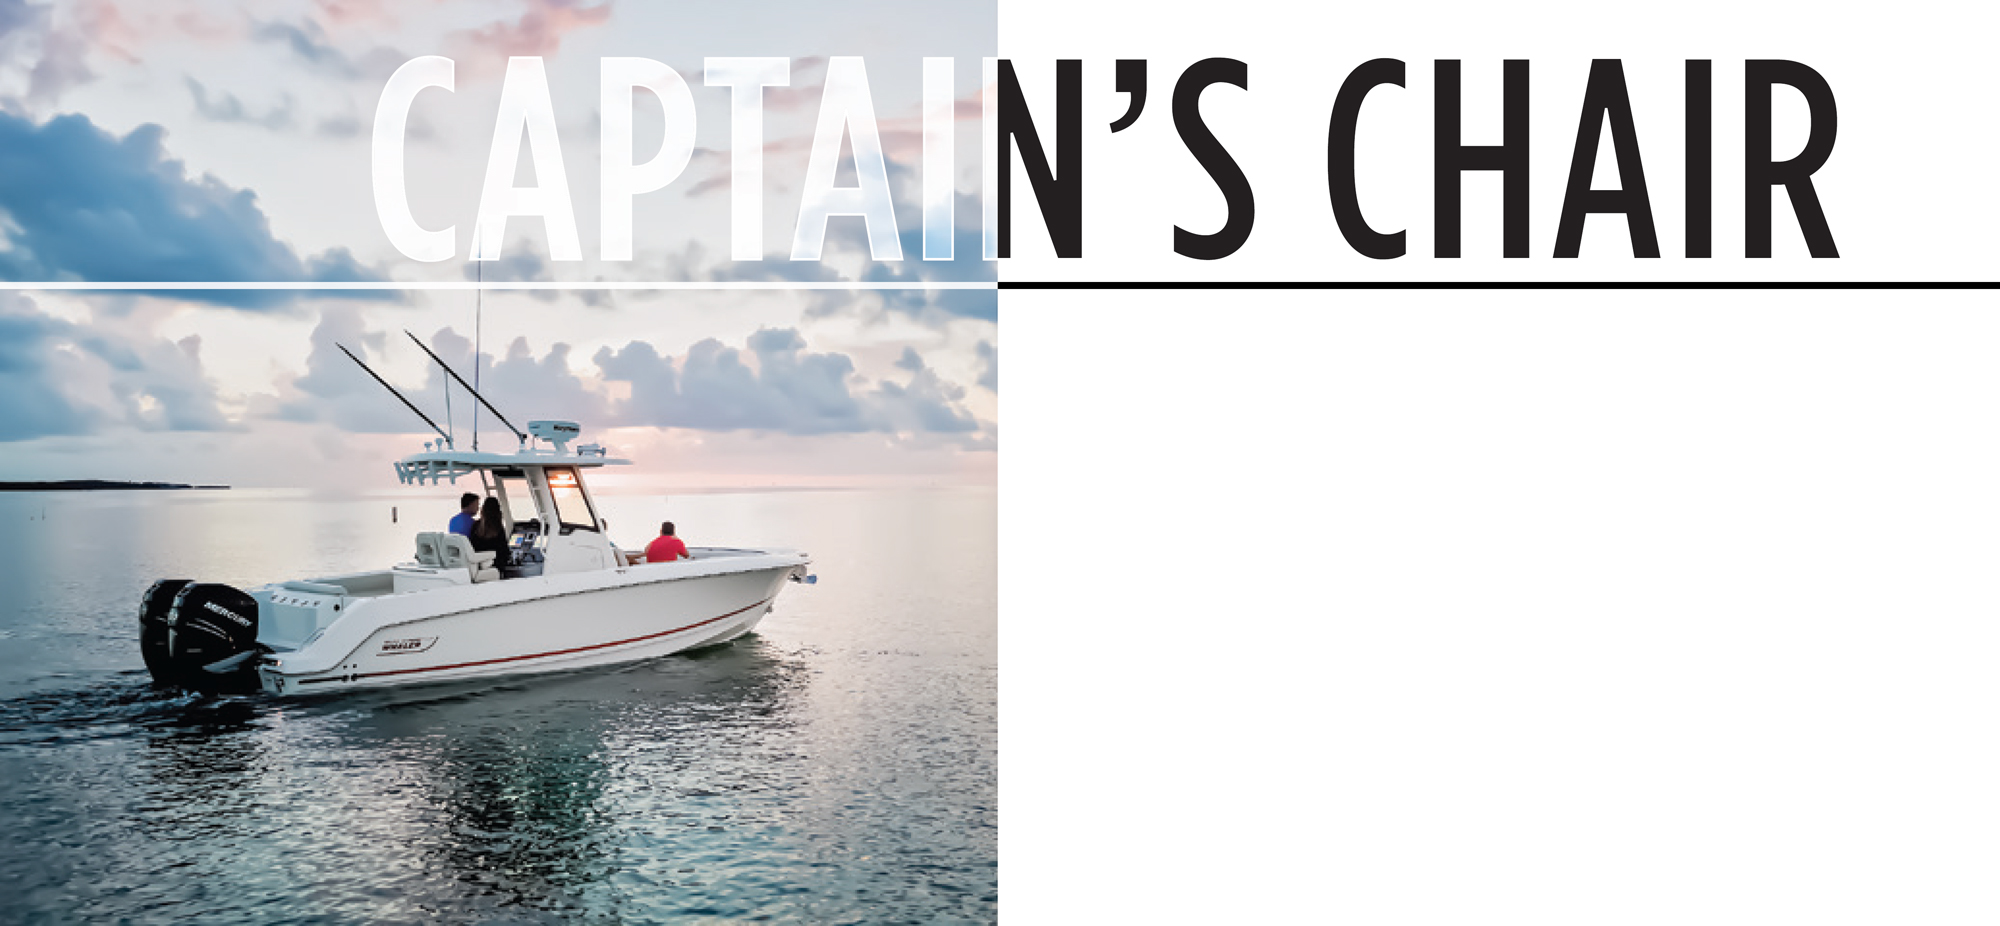 Captain's Chair Typography and boat in the sea